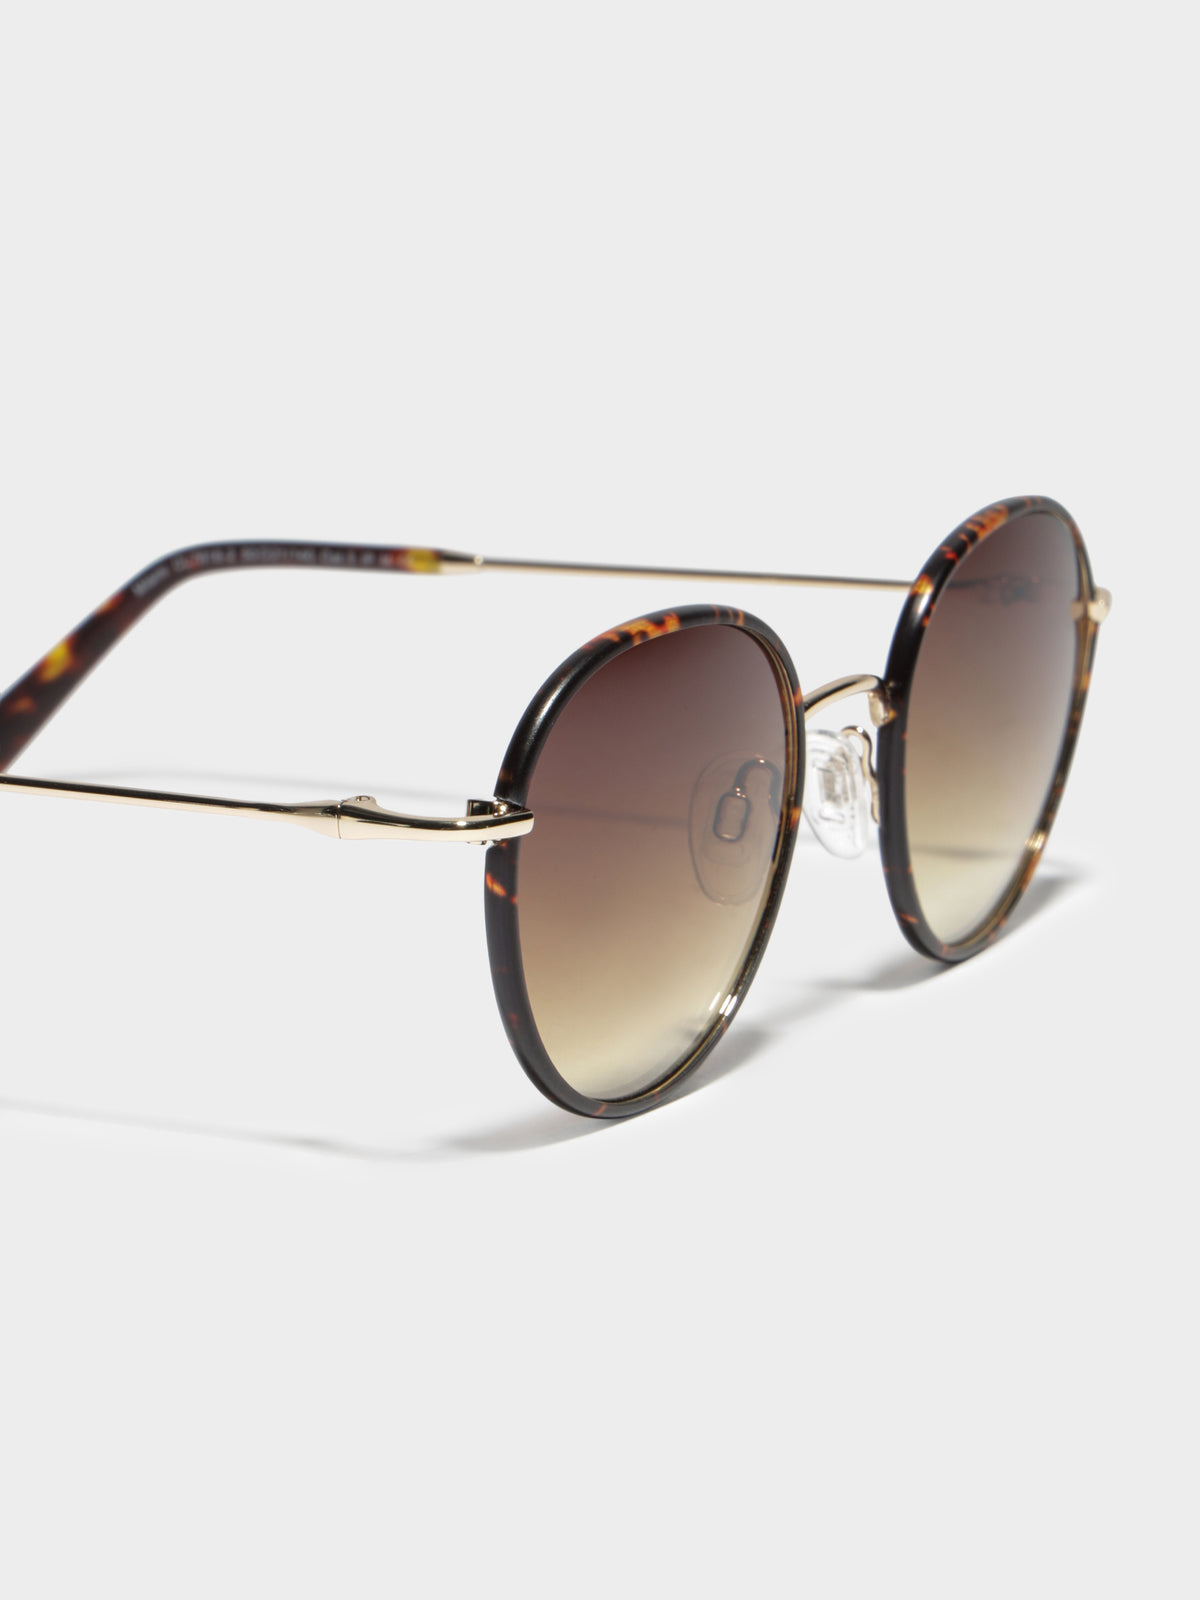 CL781602 Miami Sunglasses in Gold and Tortoise Shell